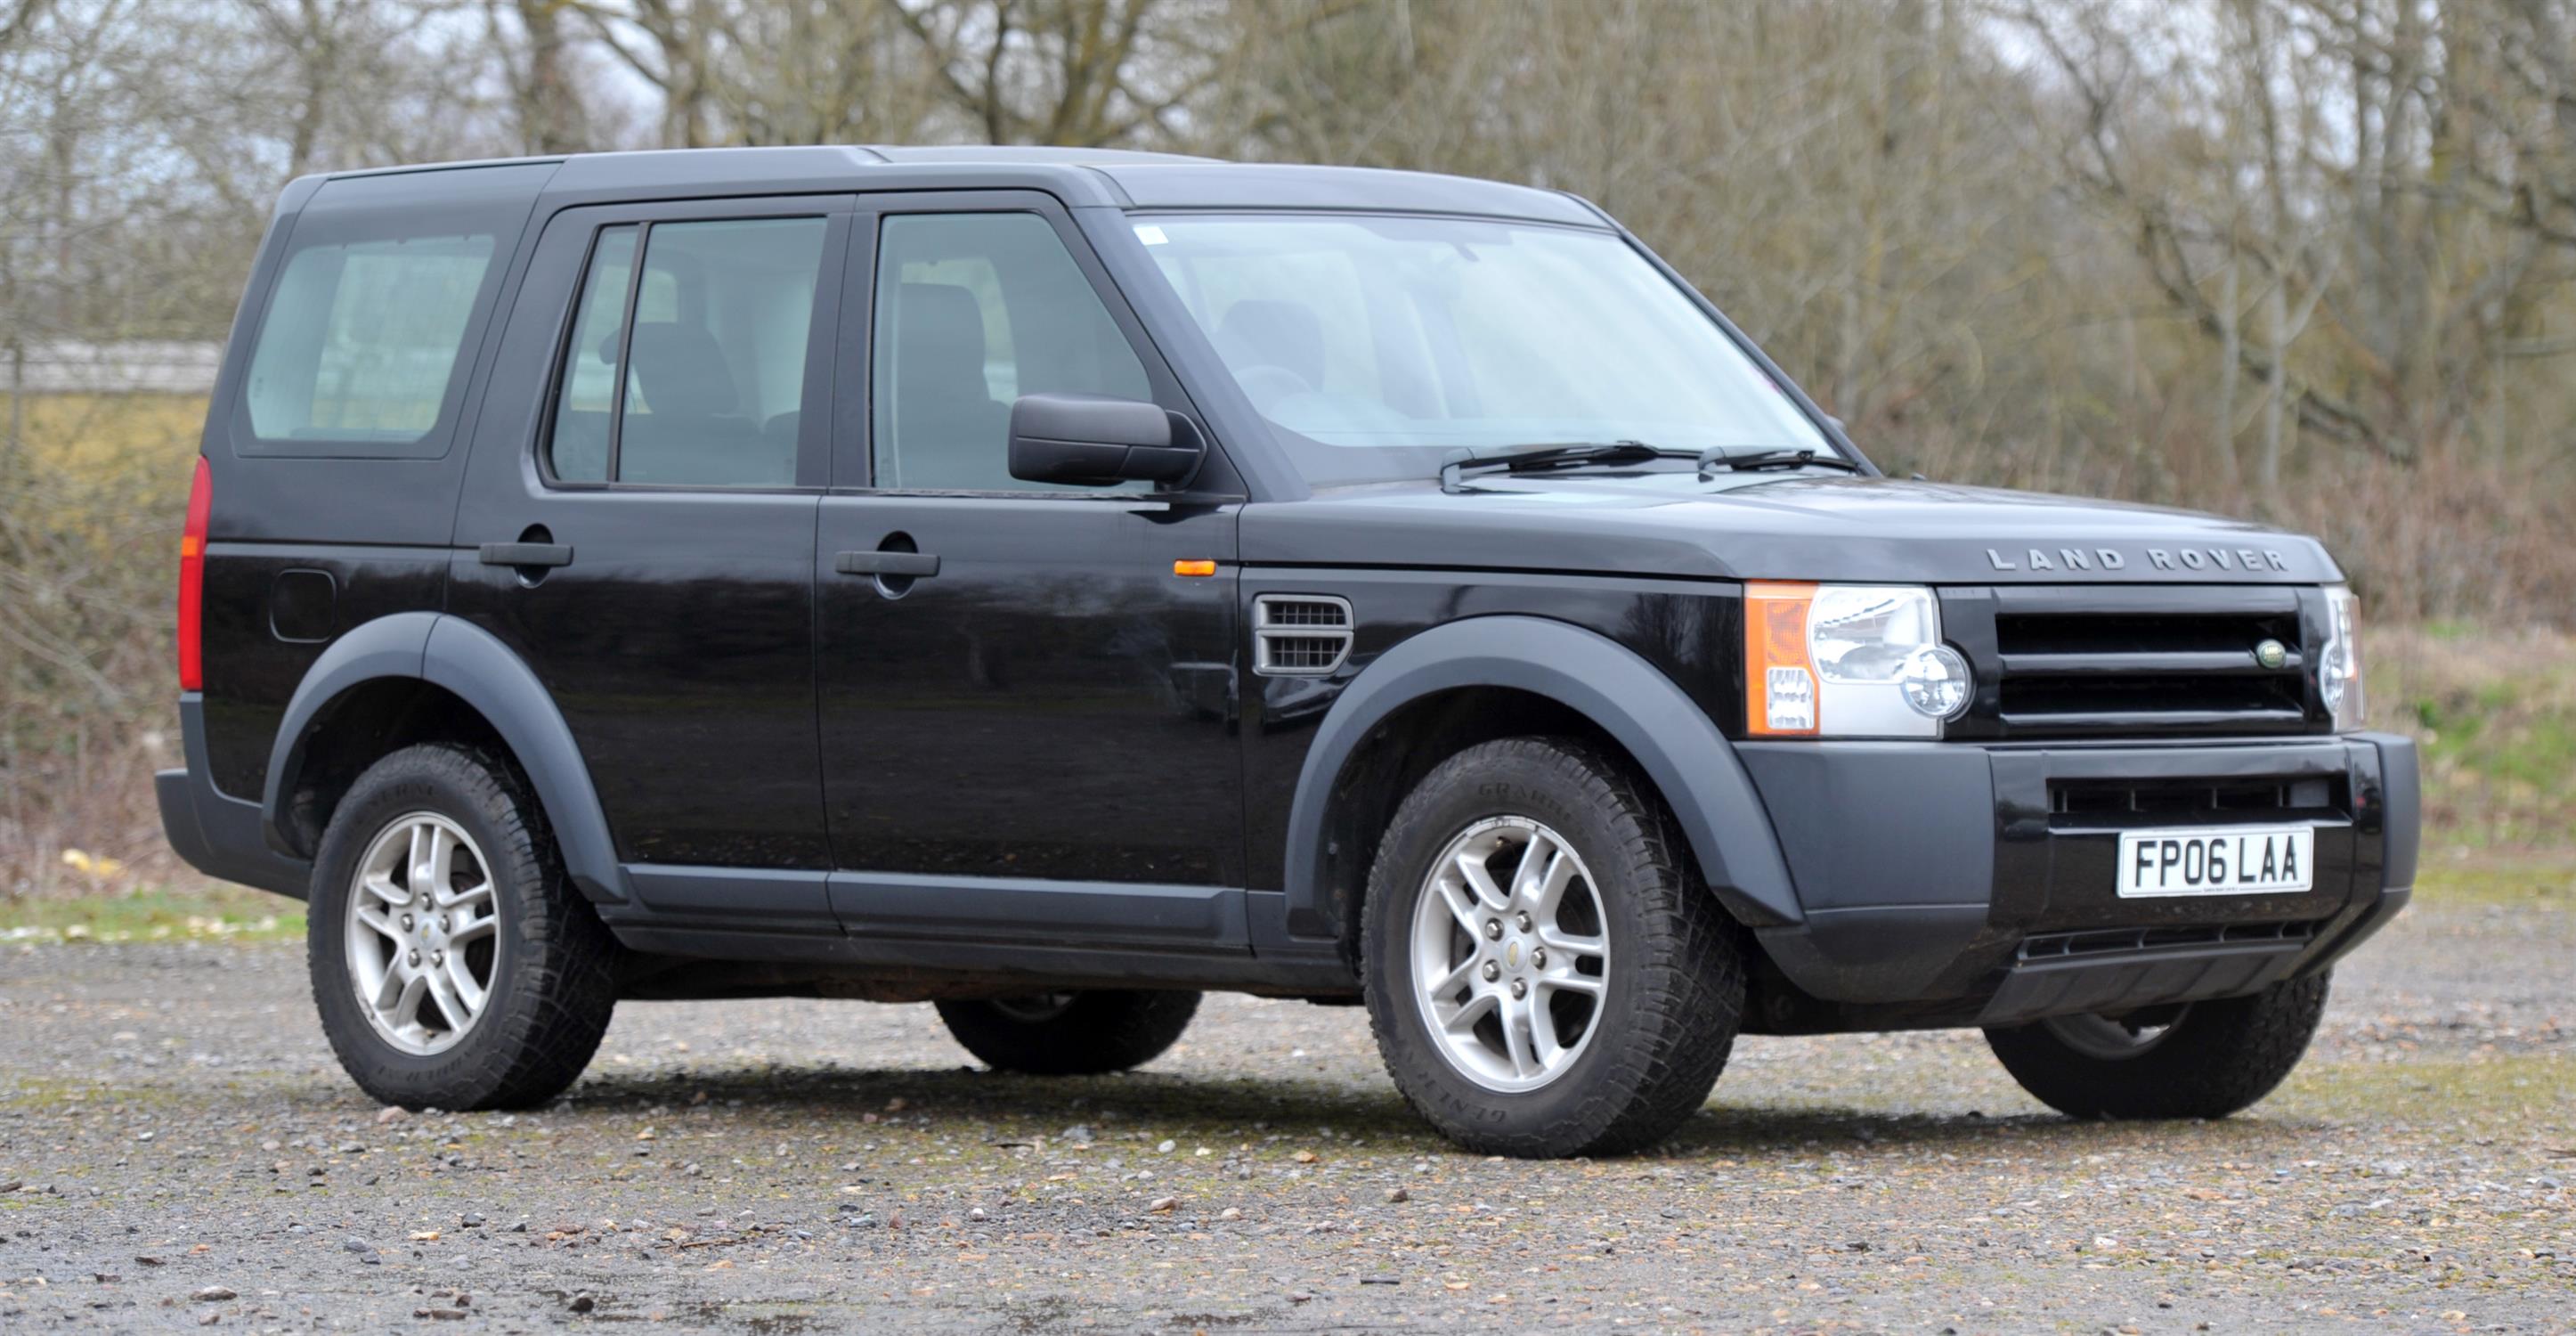 Land Rover Discovery 3 TDV6 Diesel 6 Speed Manual. Registration number: FP06 LAA. Mileage: 125,360.